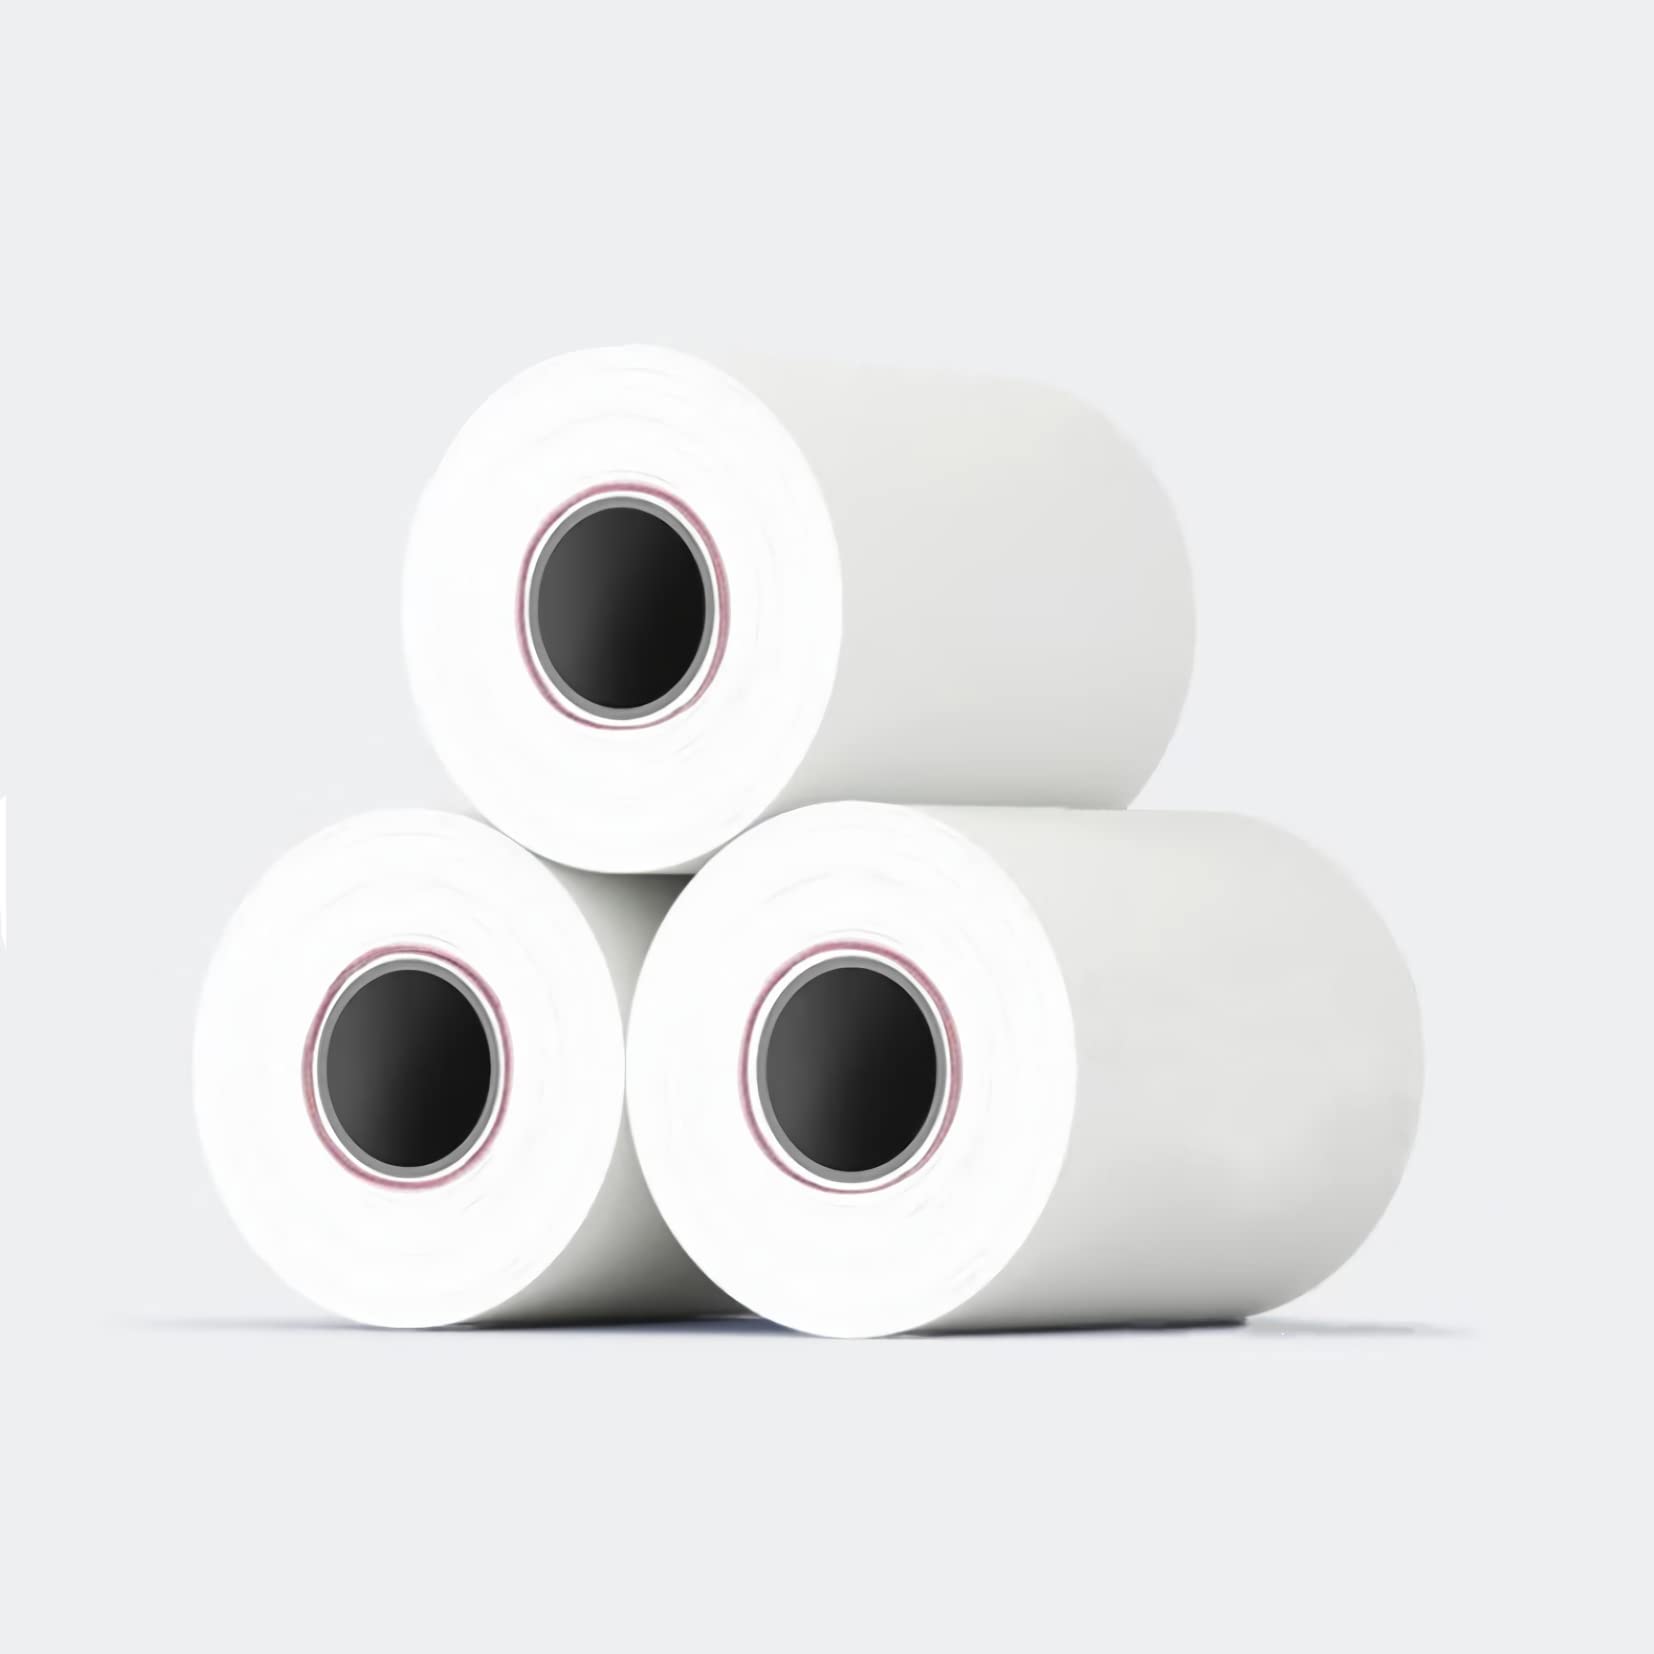 MFLABEL 3-18 x 119 Thermal Receipt Paper, Pos Receipt Paper, cash Register Paper Rolls, Receipt Paper Roll for 80mm Ther